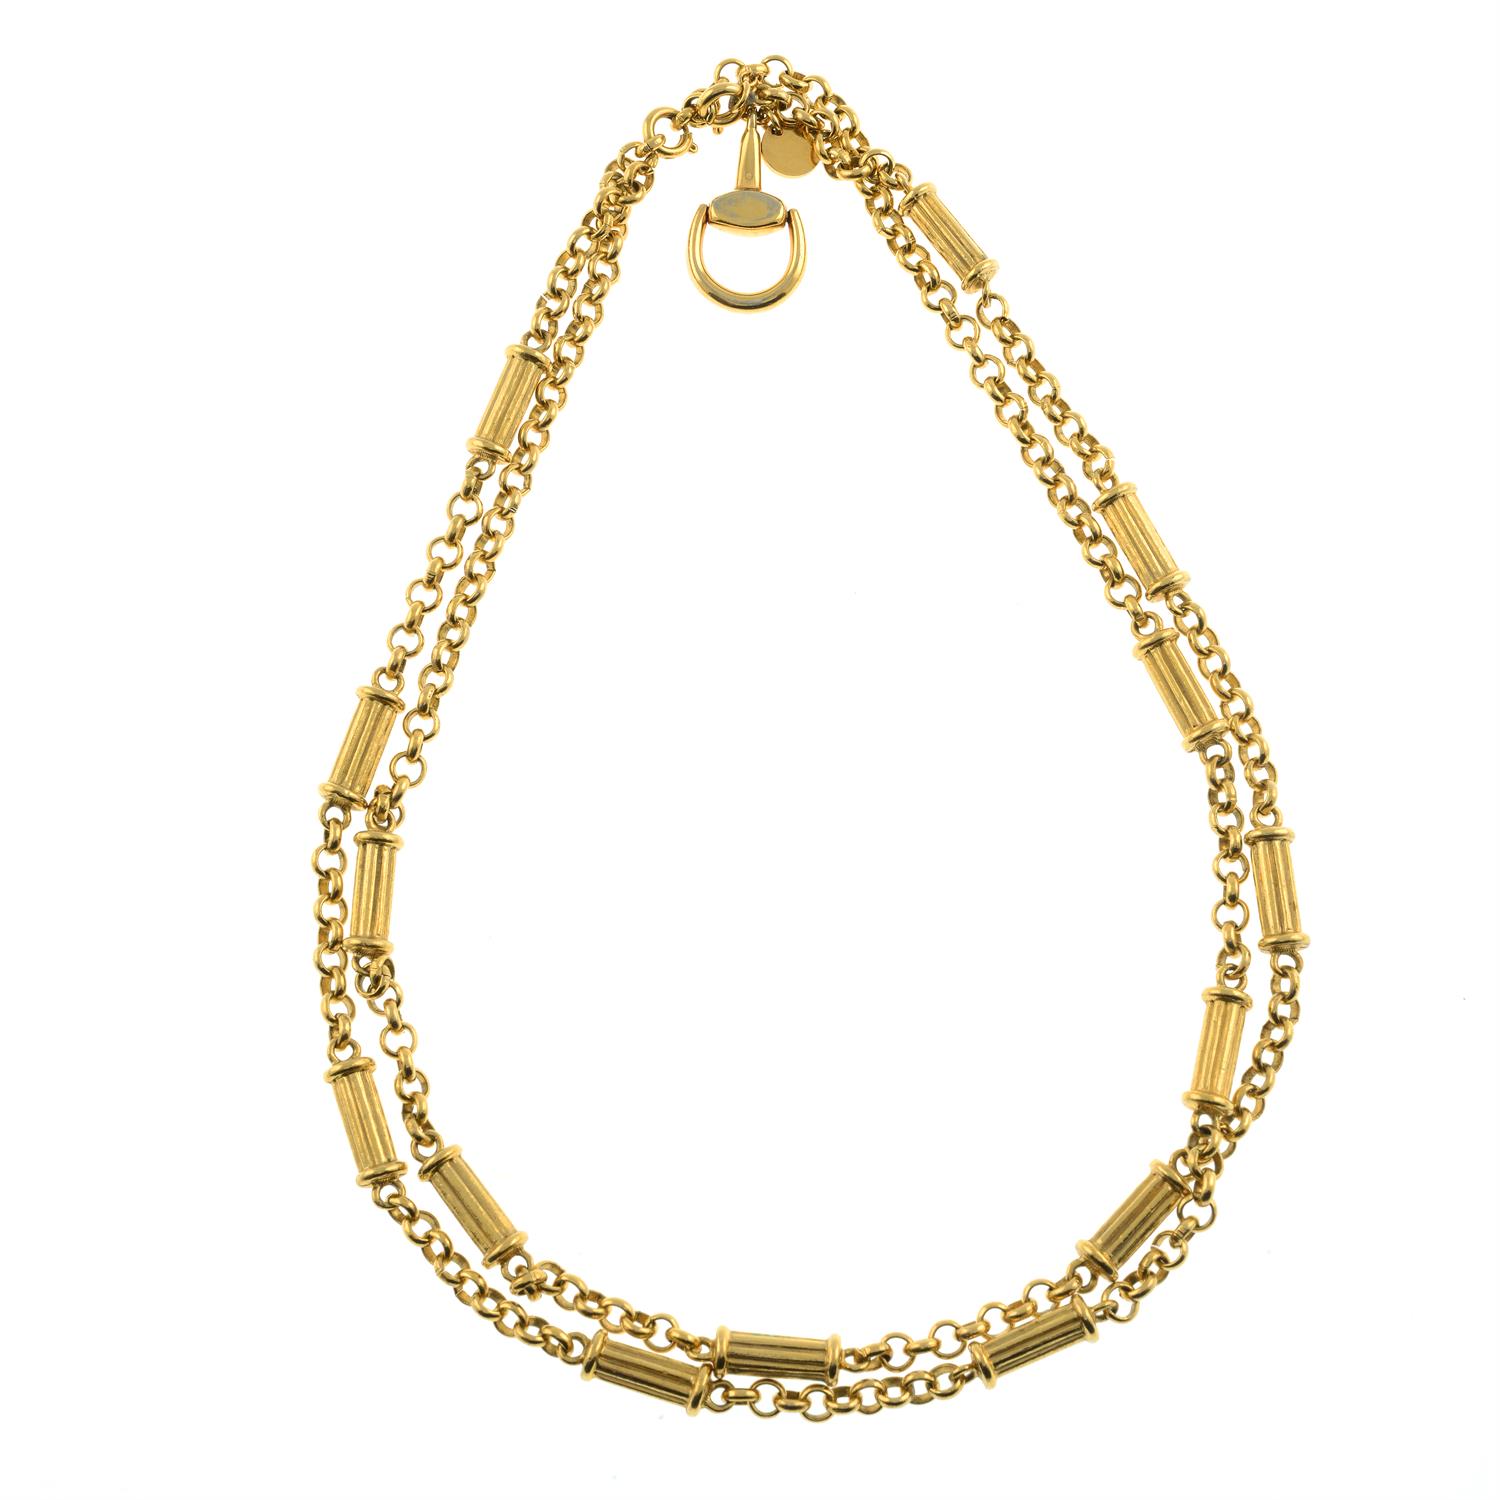 Gucci - chain necklace. - Image 2 of 3